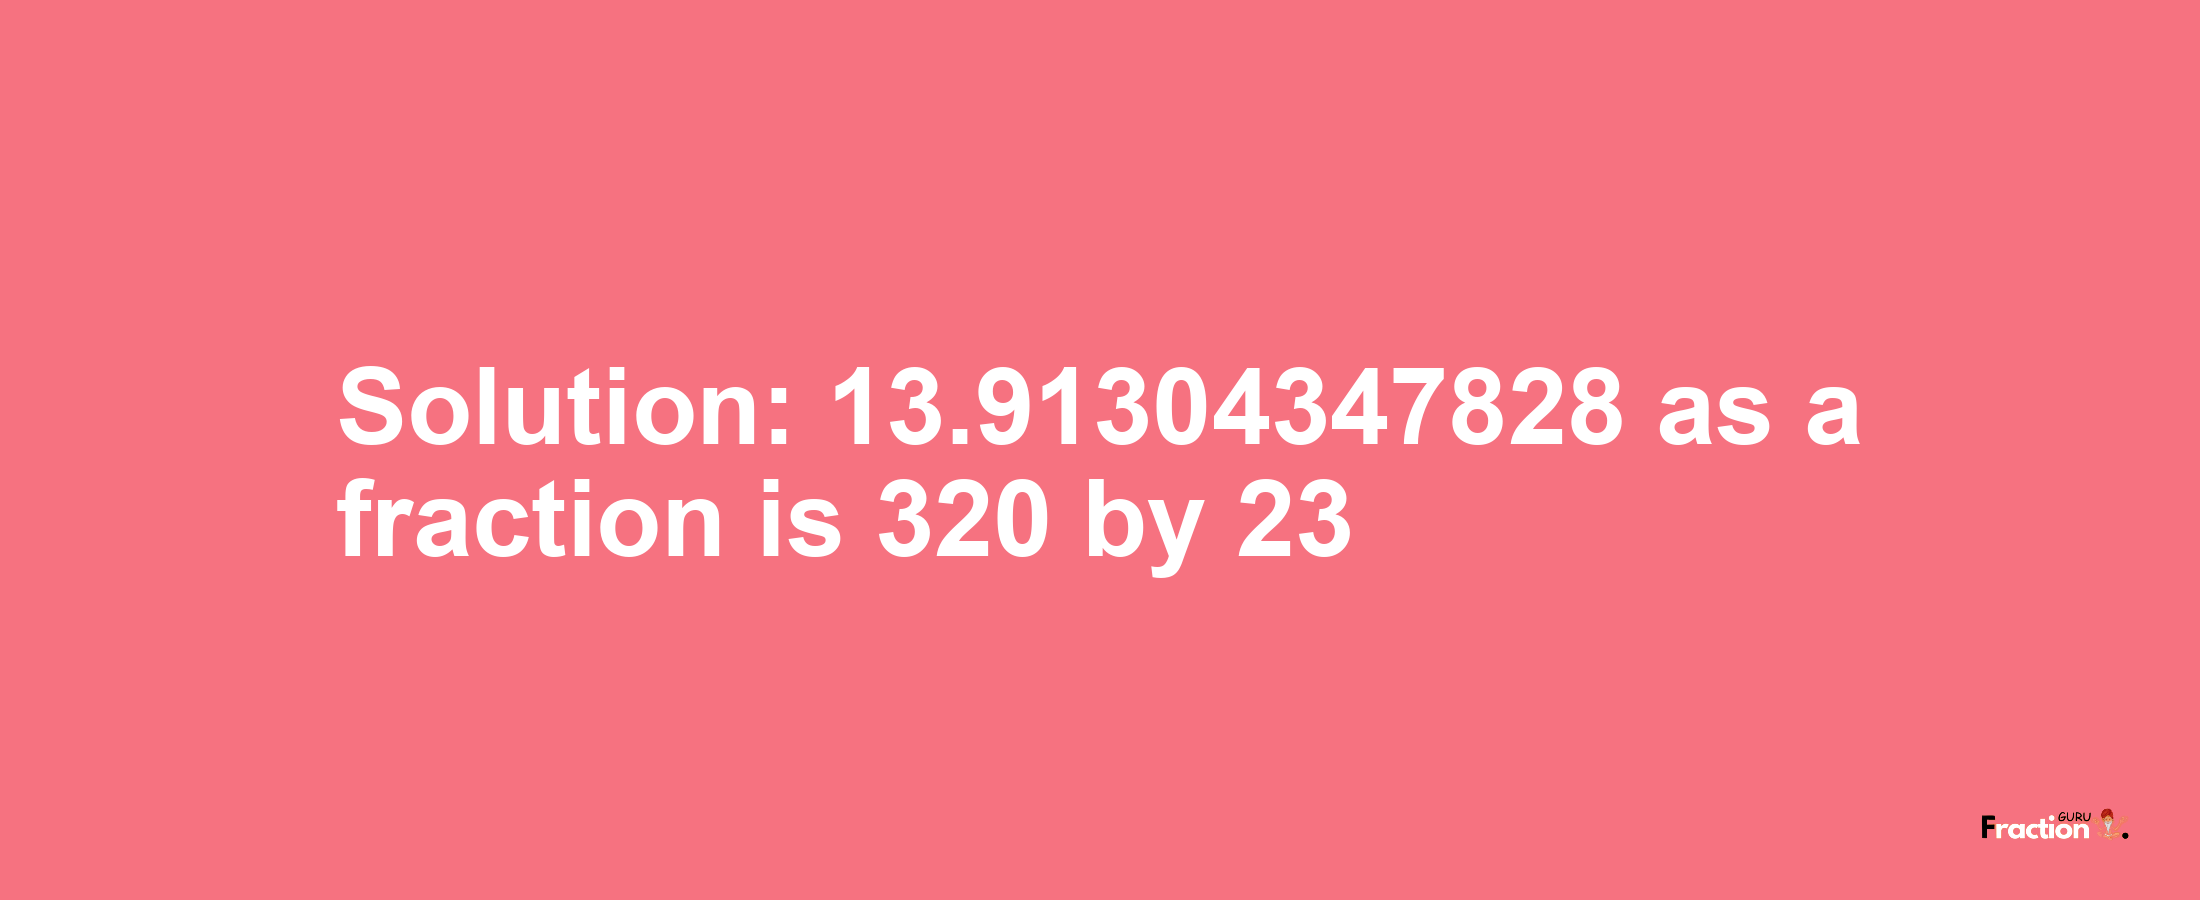 Solution:13.91304347828 as a fraction is 320/23